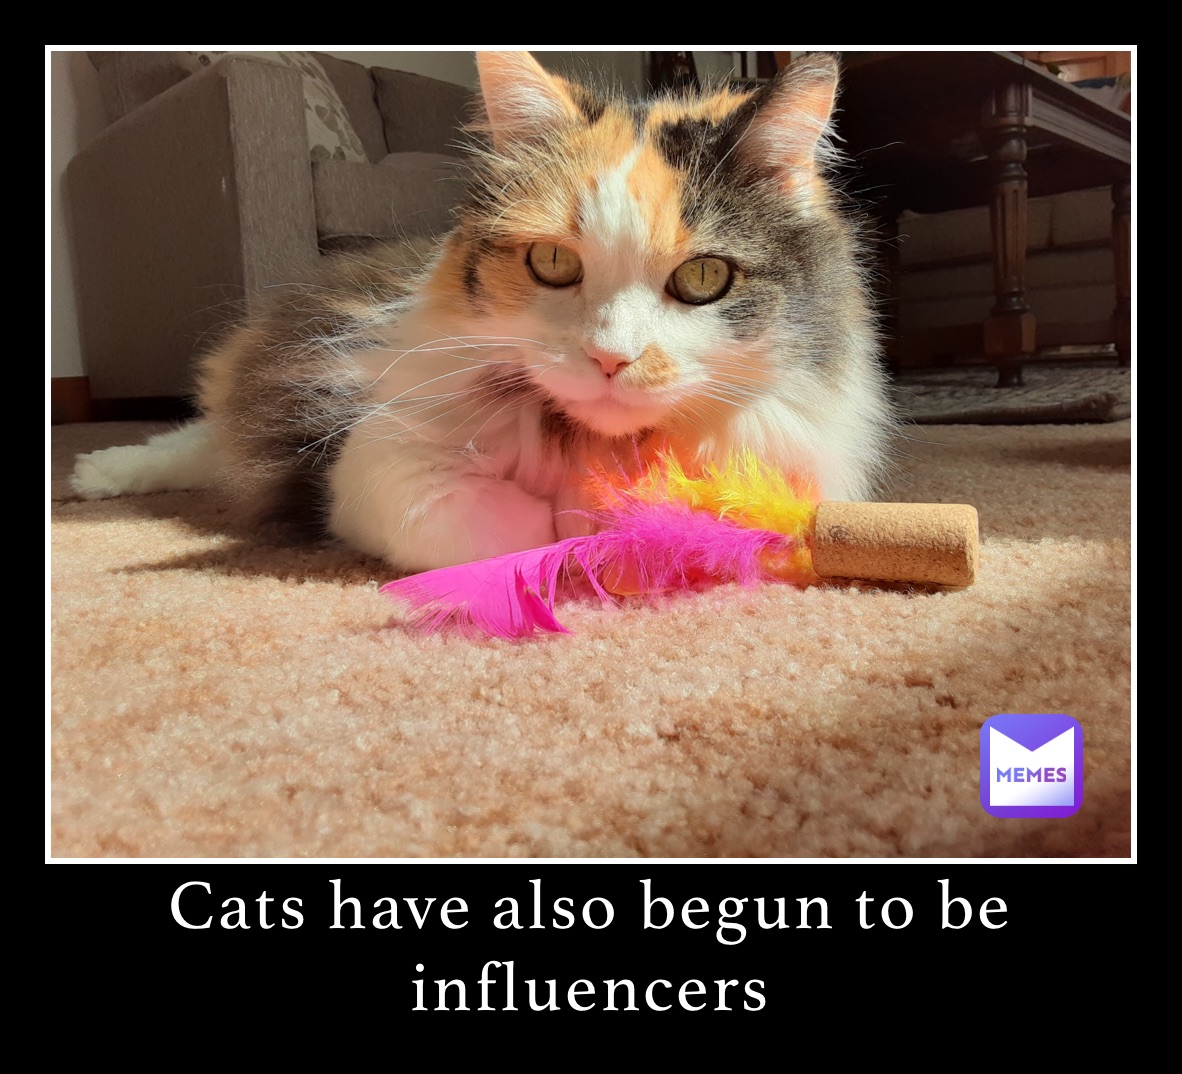 Cats have also begun to be influencers